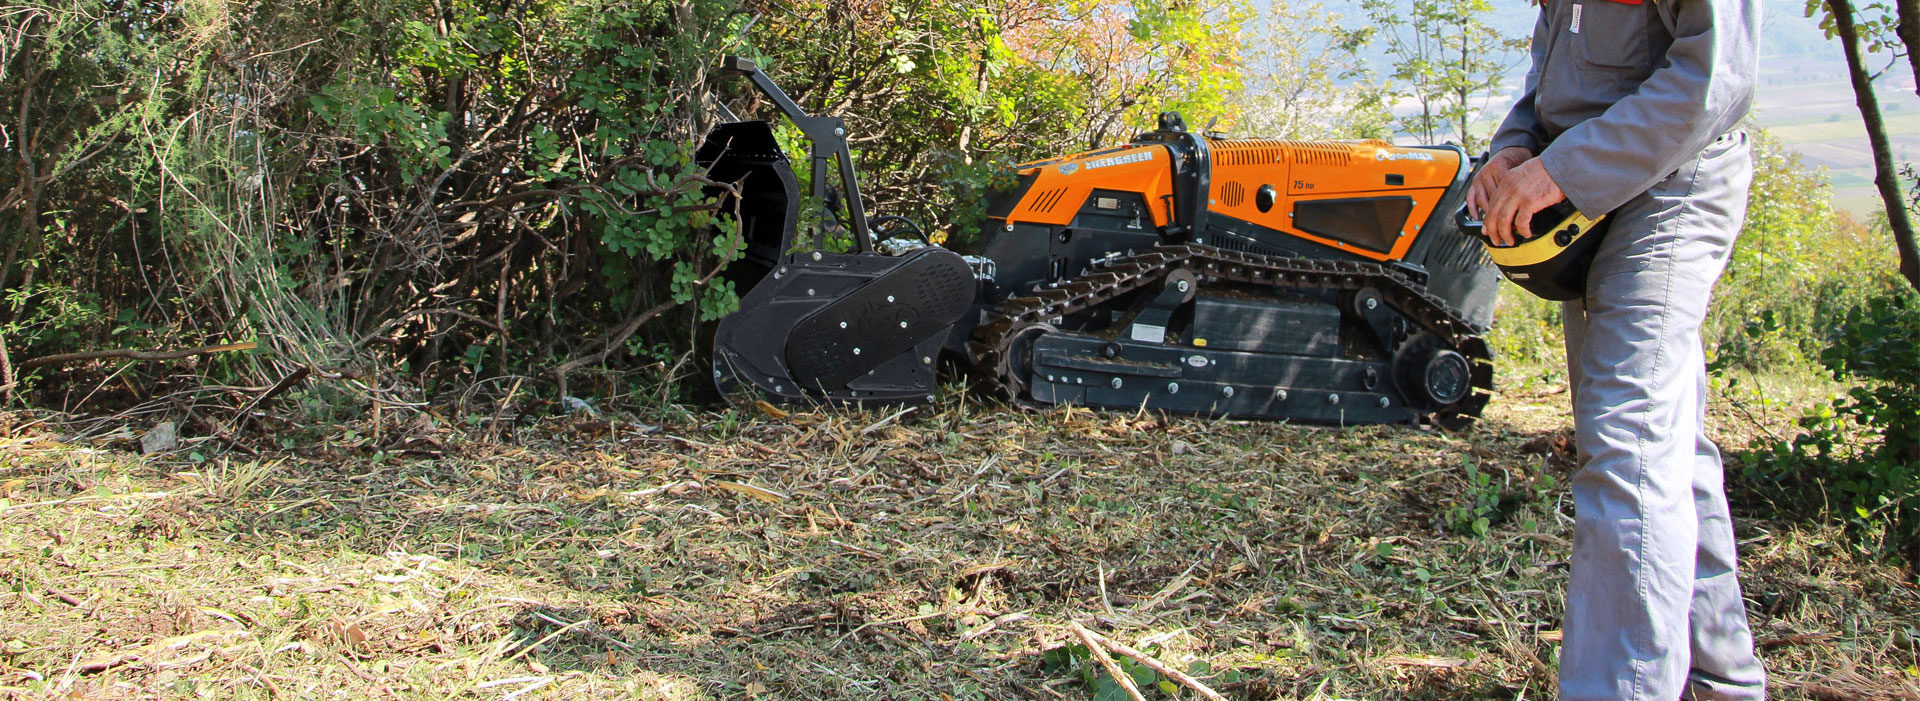 Energreen RoboMAX Remote Controlled Forestry Mulcher for Sale